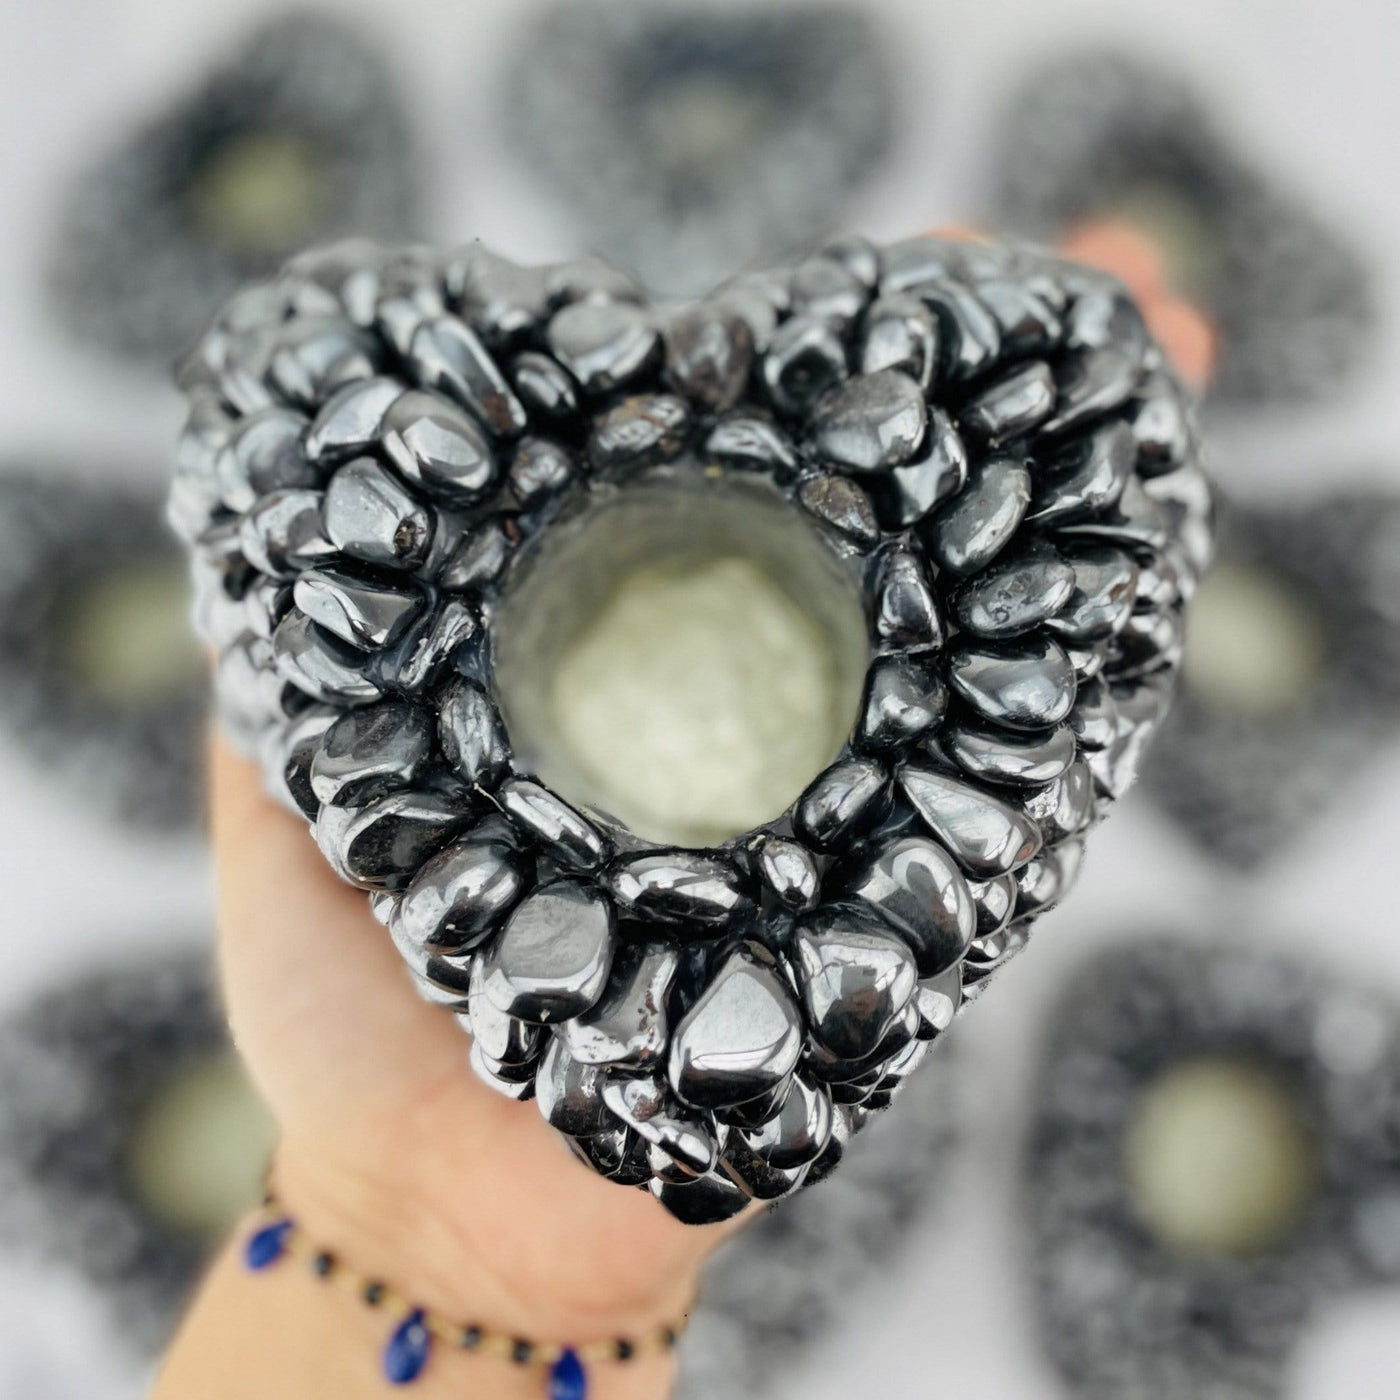 hematite tumbled stone heart candle holder - one held in a hand